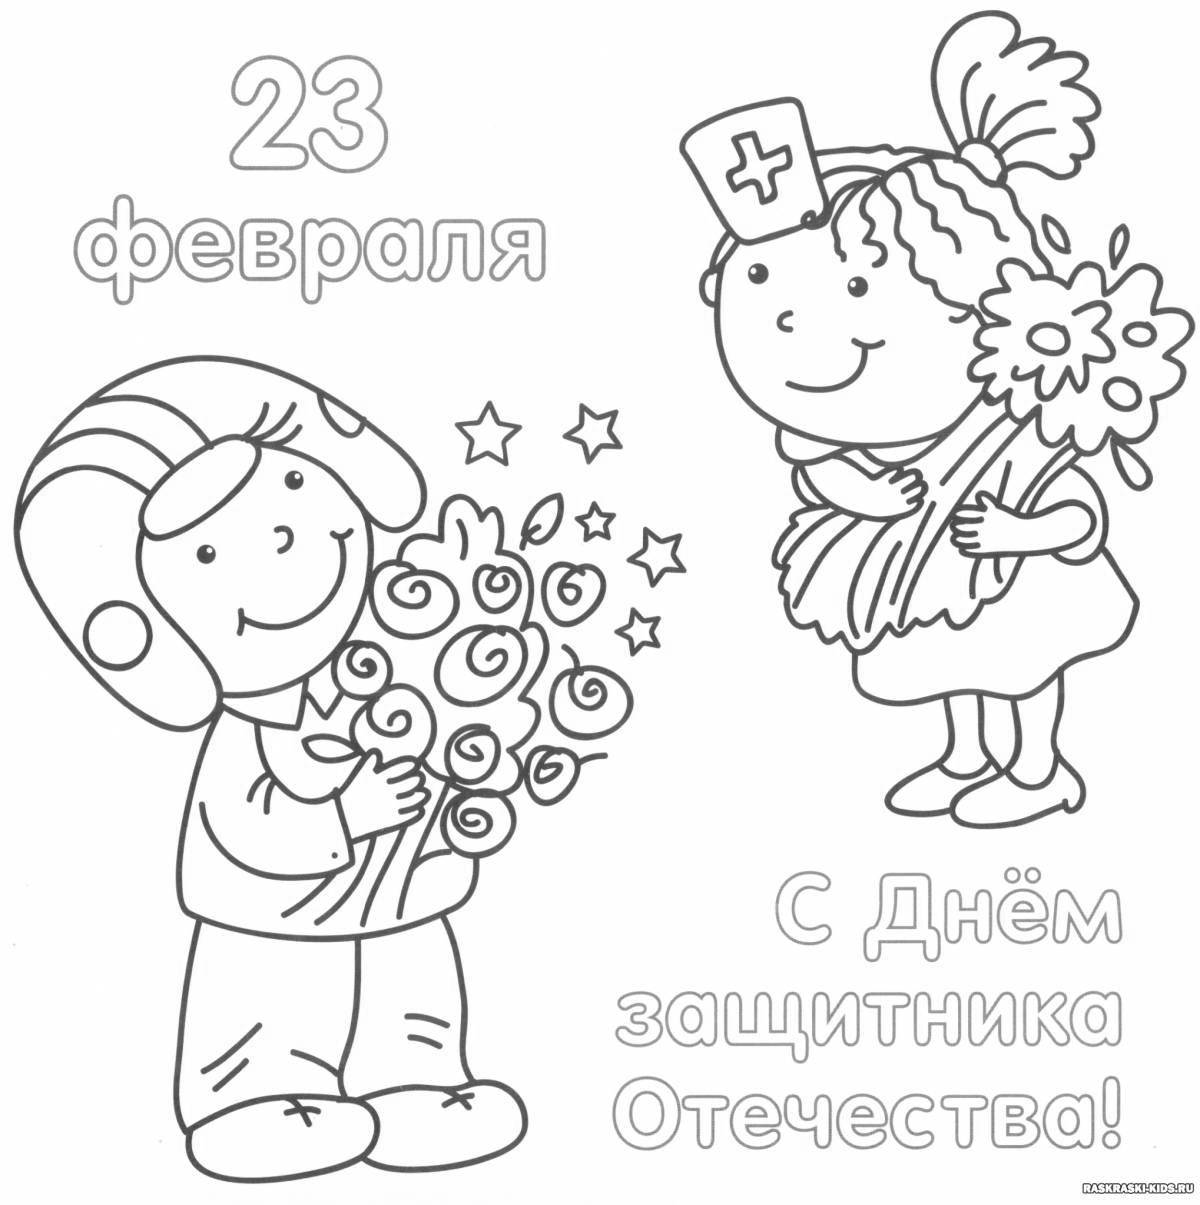 Bright congratulations coloring pages